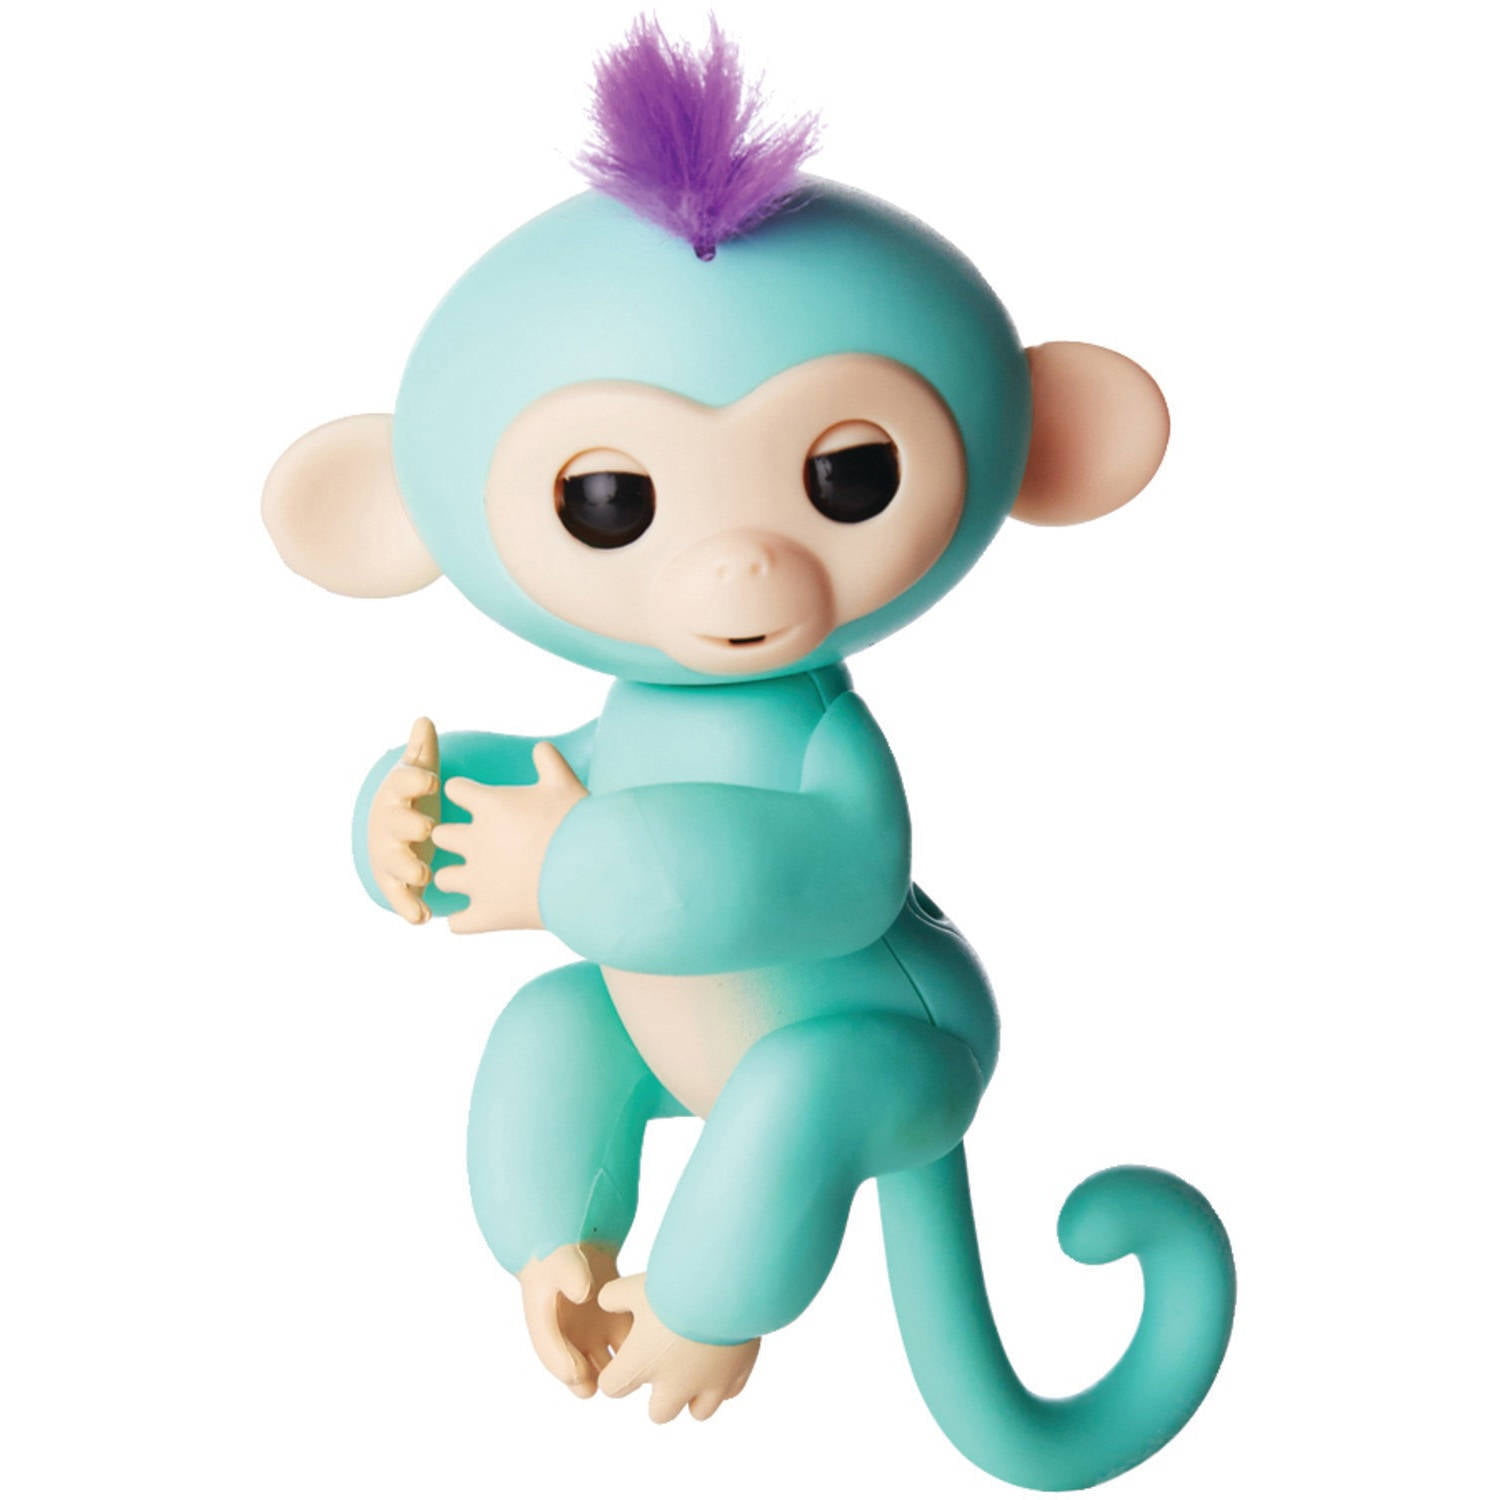 The Purple Interactive Monkey  WowWee Toys Ship from USA 